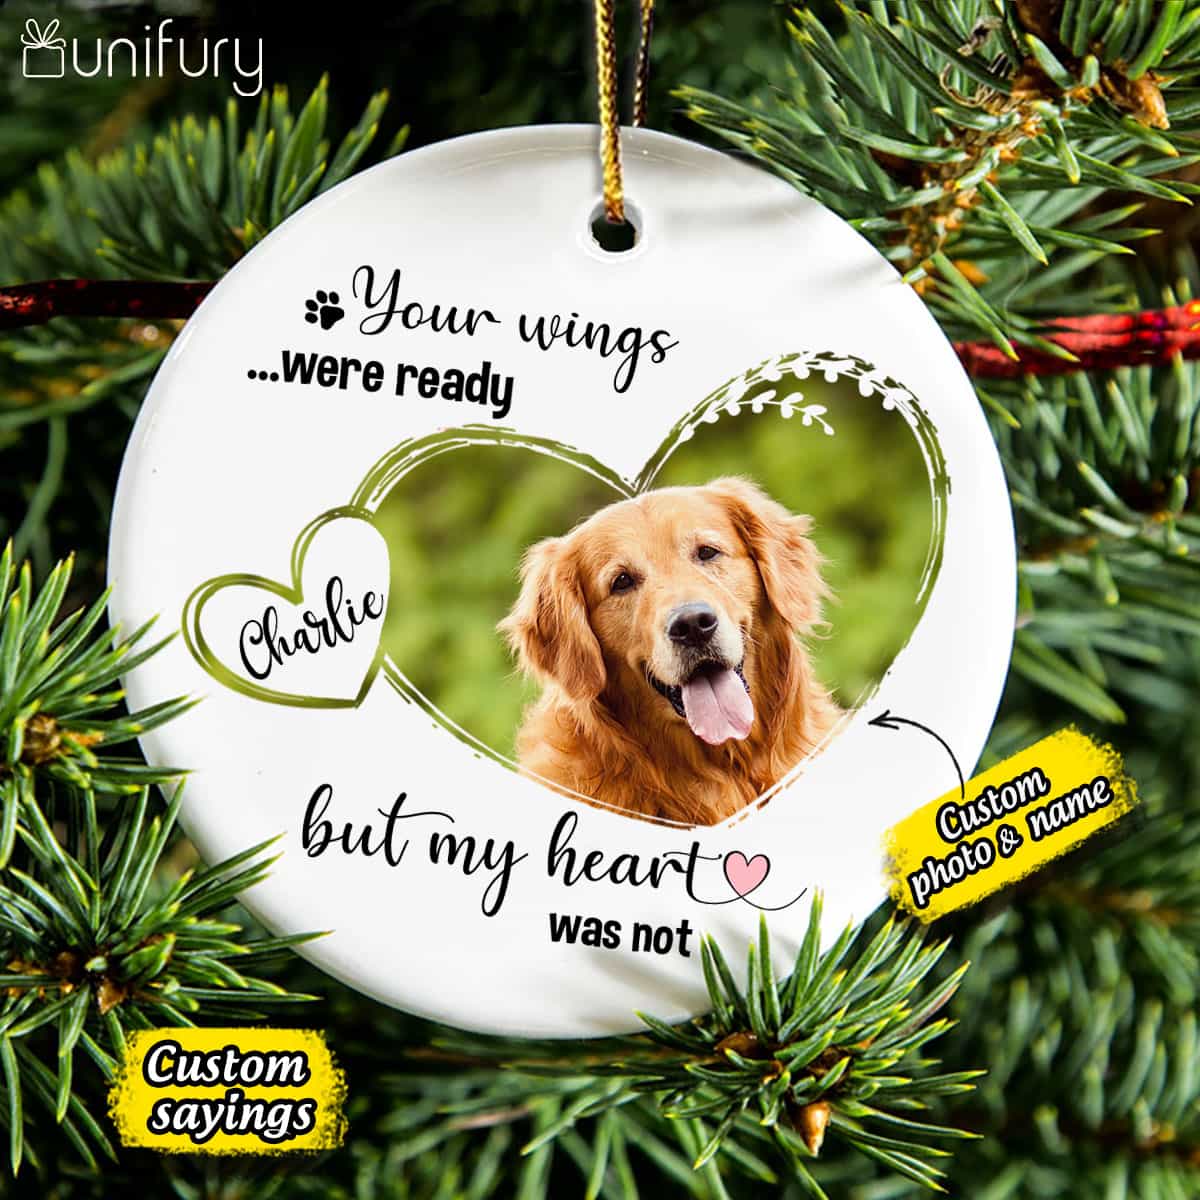 Personalized Dog Cat Memorial Christmas Ceramic Ornaments (PRINTED ON BOTH SIDES) - Custom photo &amp; sayings